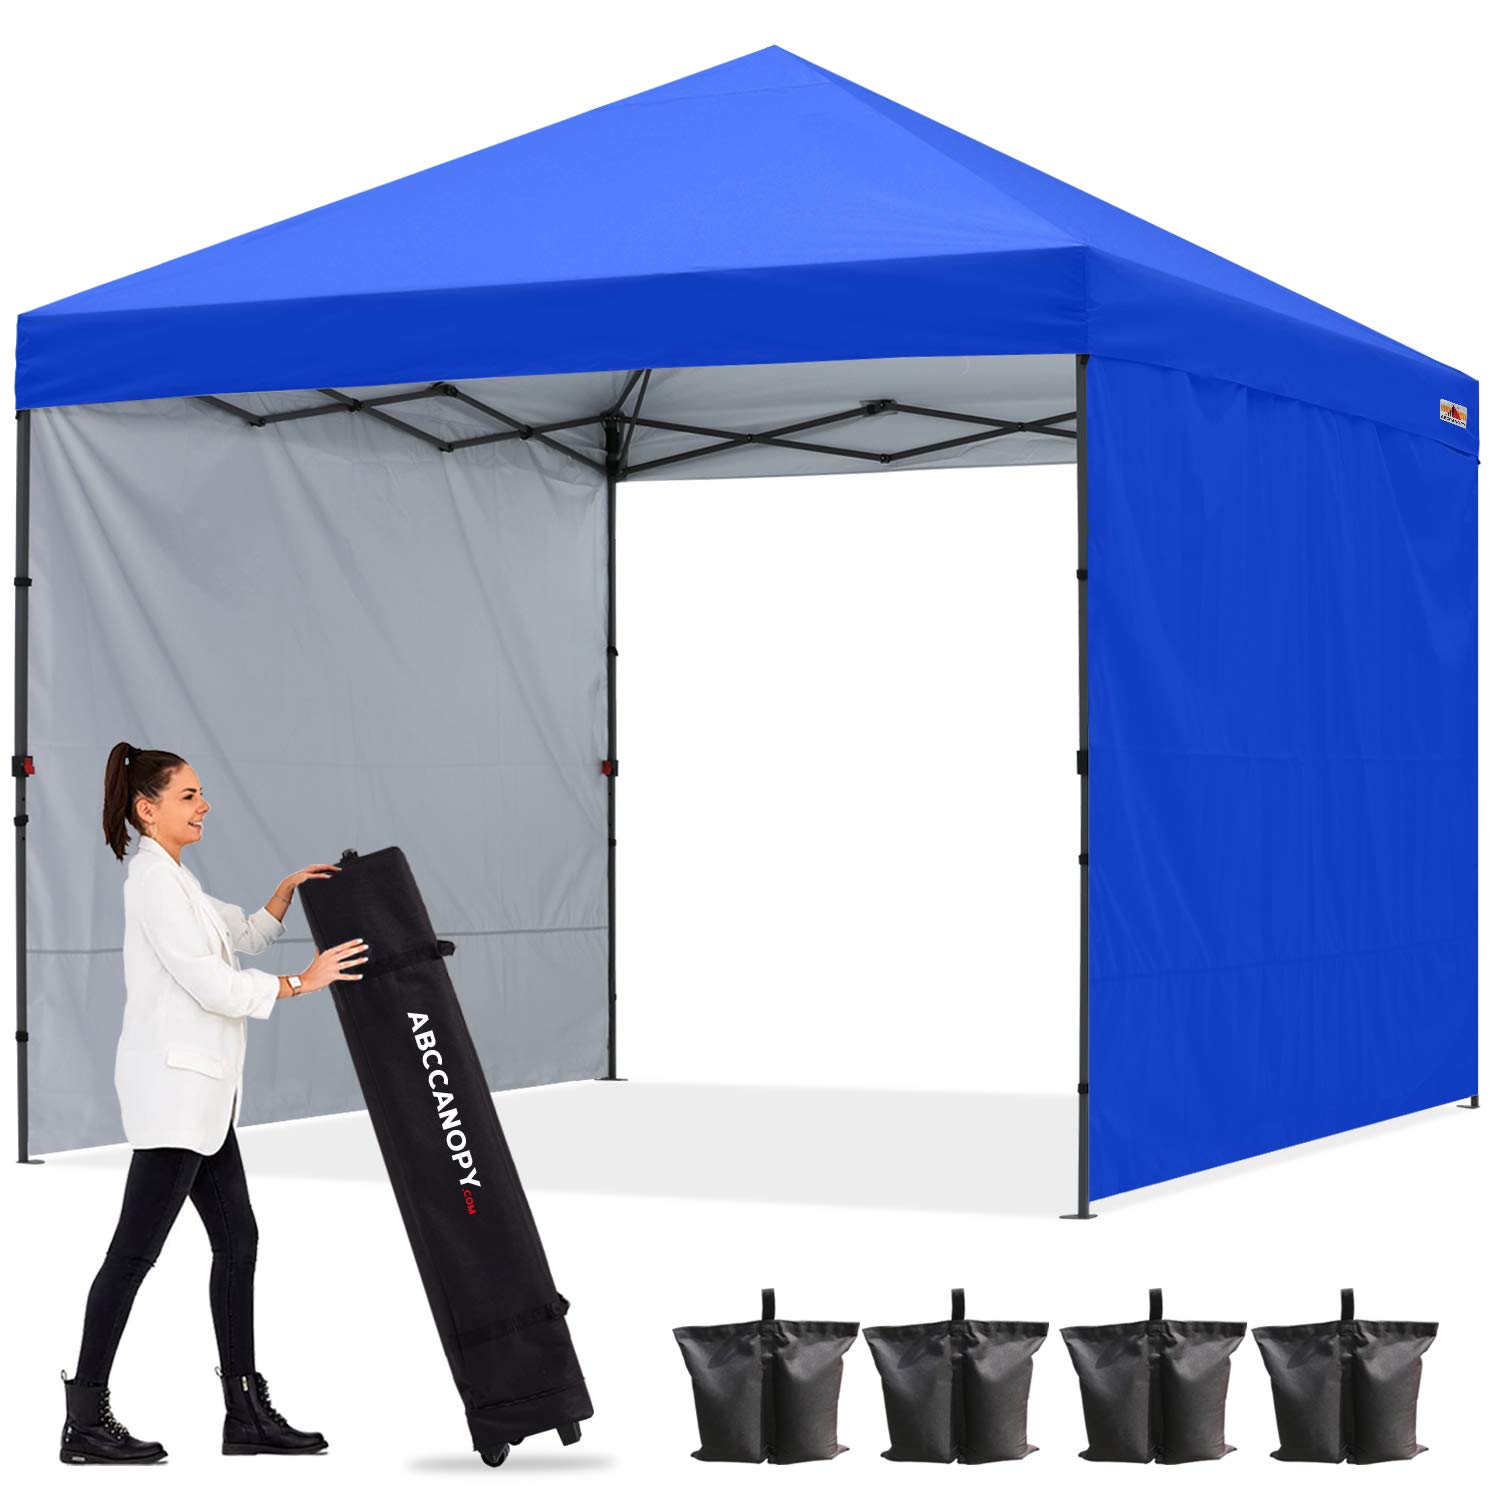 Abccanopy Outdoor Easy Pop Up Canopy Tent With 2 Sun Wall 8X8, Royal Blue